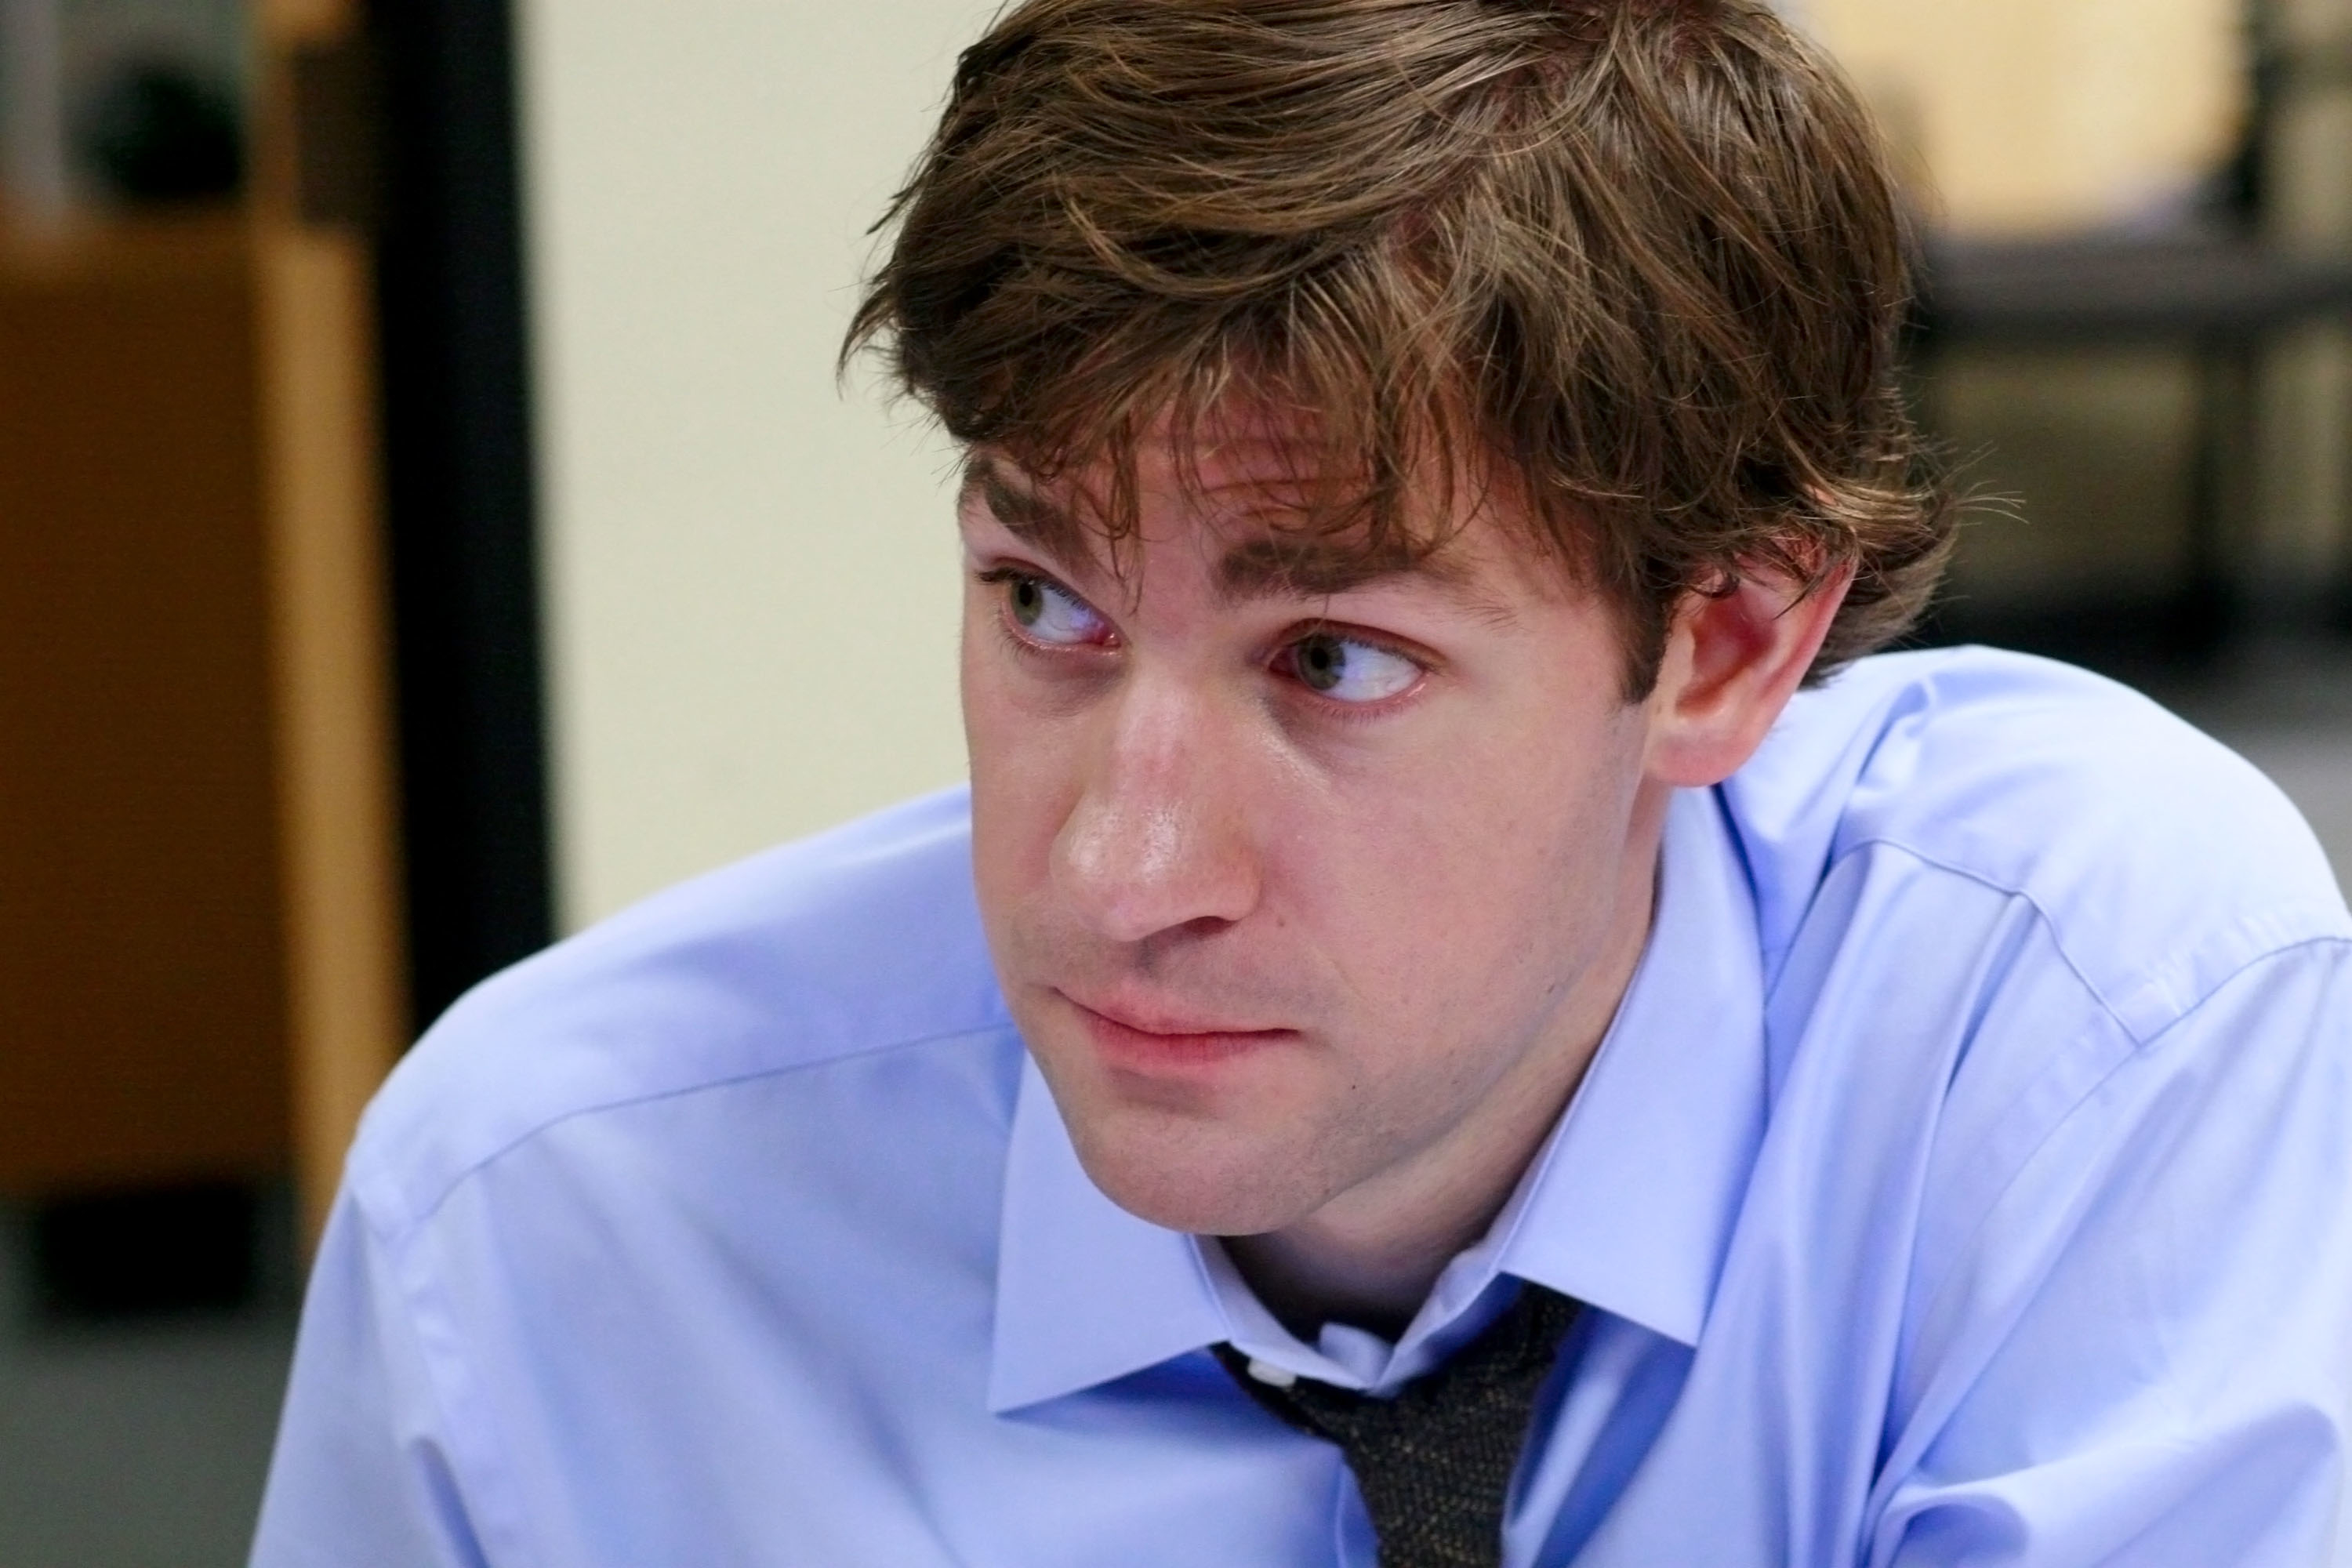 Man in button-up shirt and tie with a pensive expression, indoors. This is a scene from a TV show